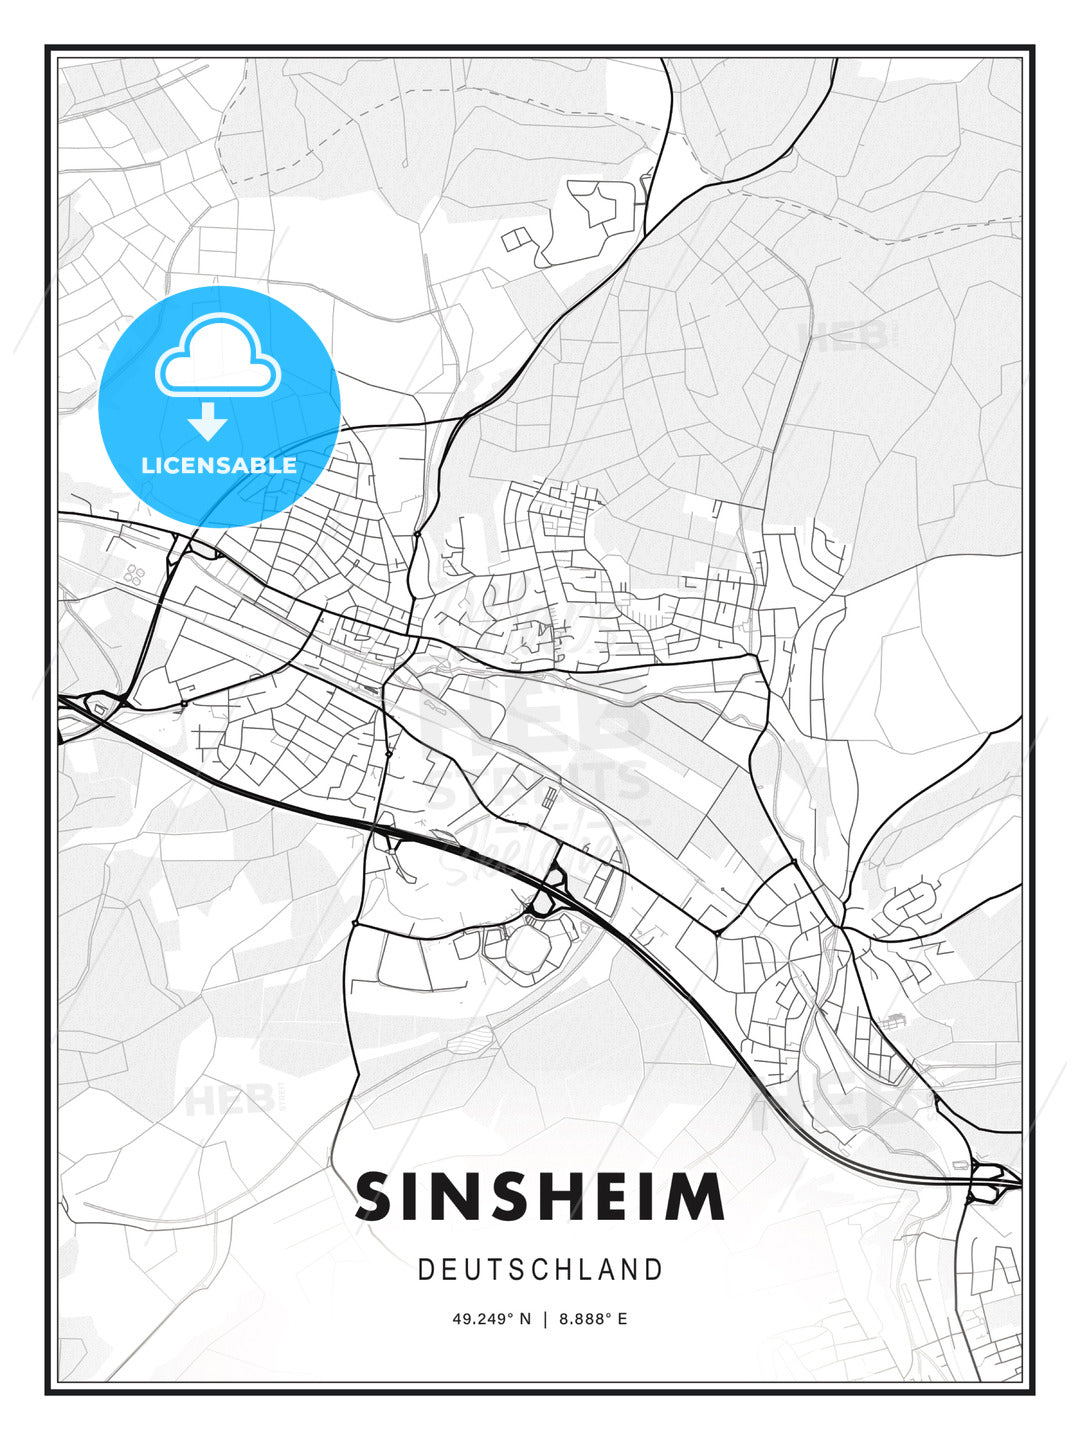 Sinsheim, Germany, Modern Print Template in Various Formats - HEBSTREITS Sketches